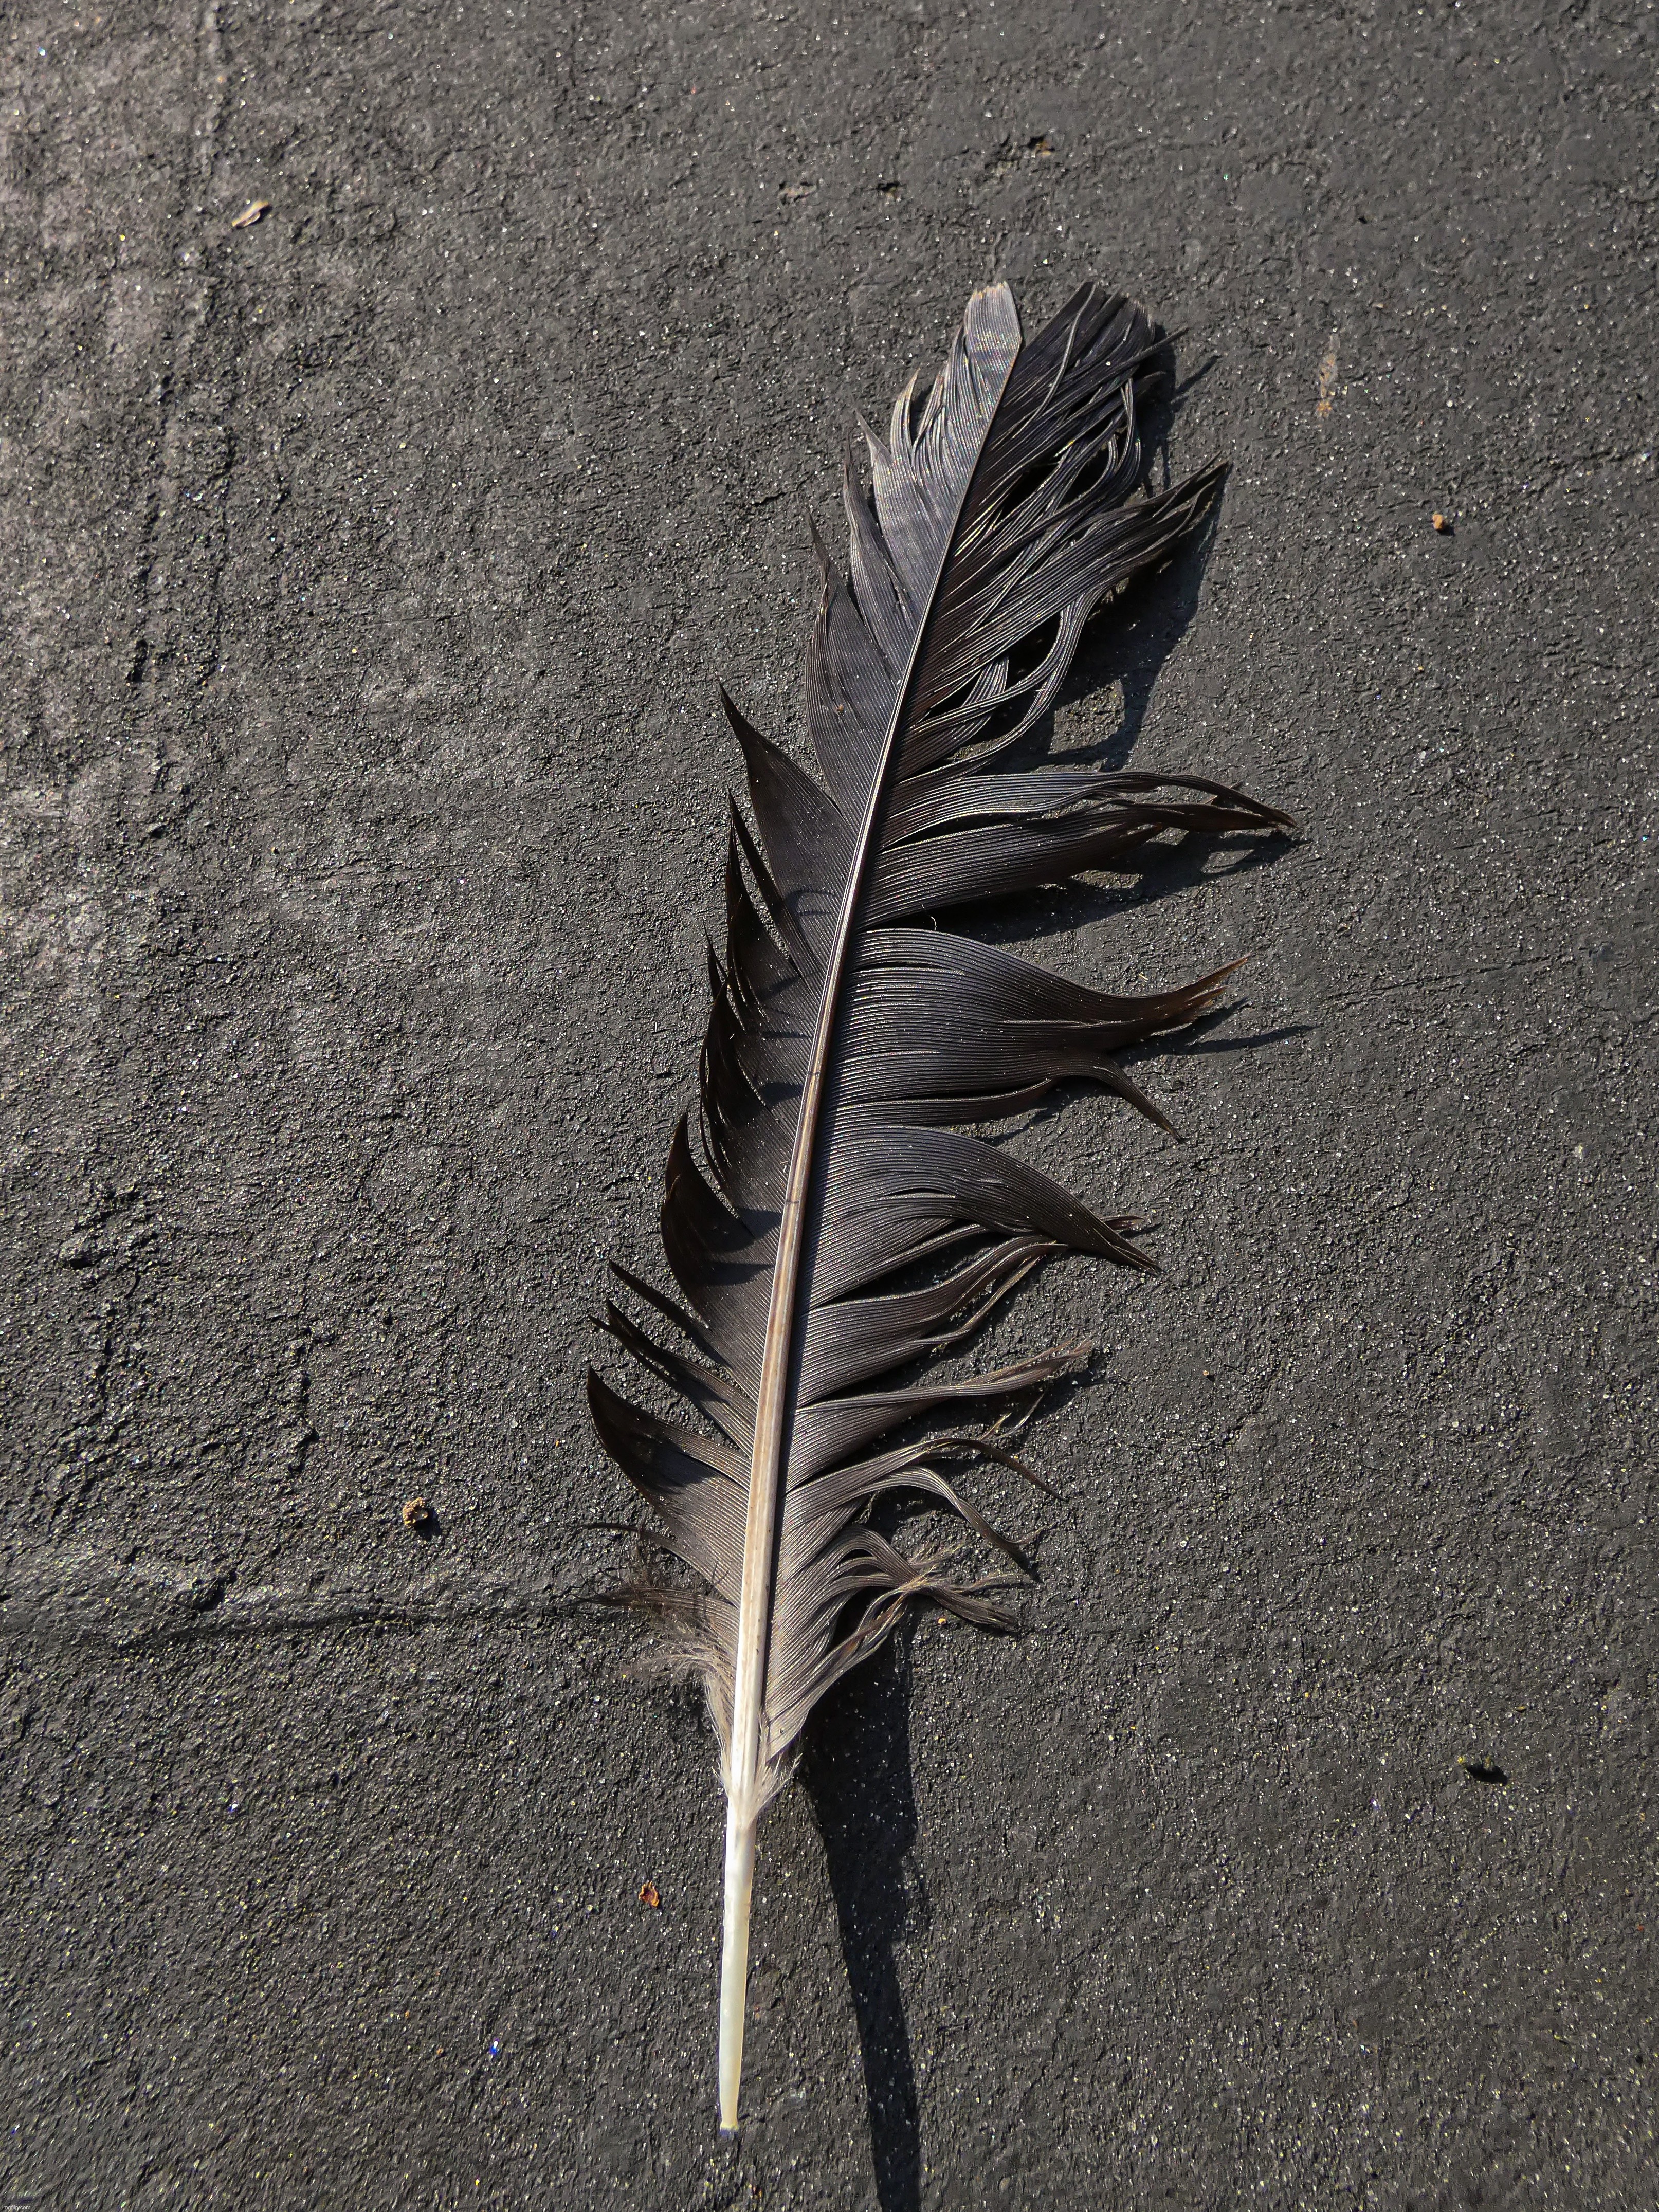 I found a really cool crow feather on the ground today! | image tagged in share your own photos | made w/ Imgflip meme maker